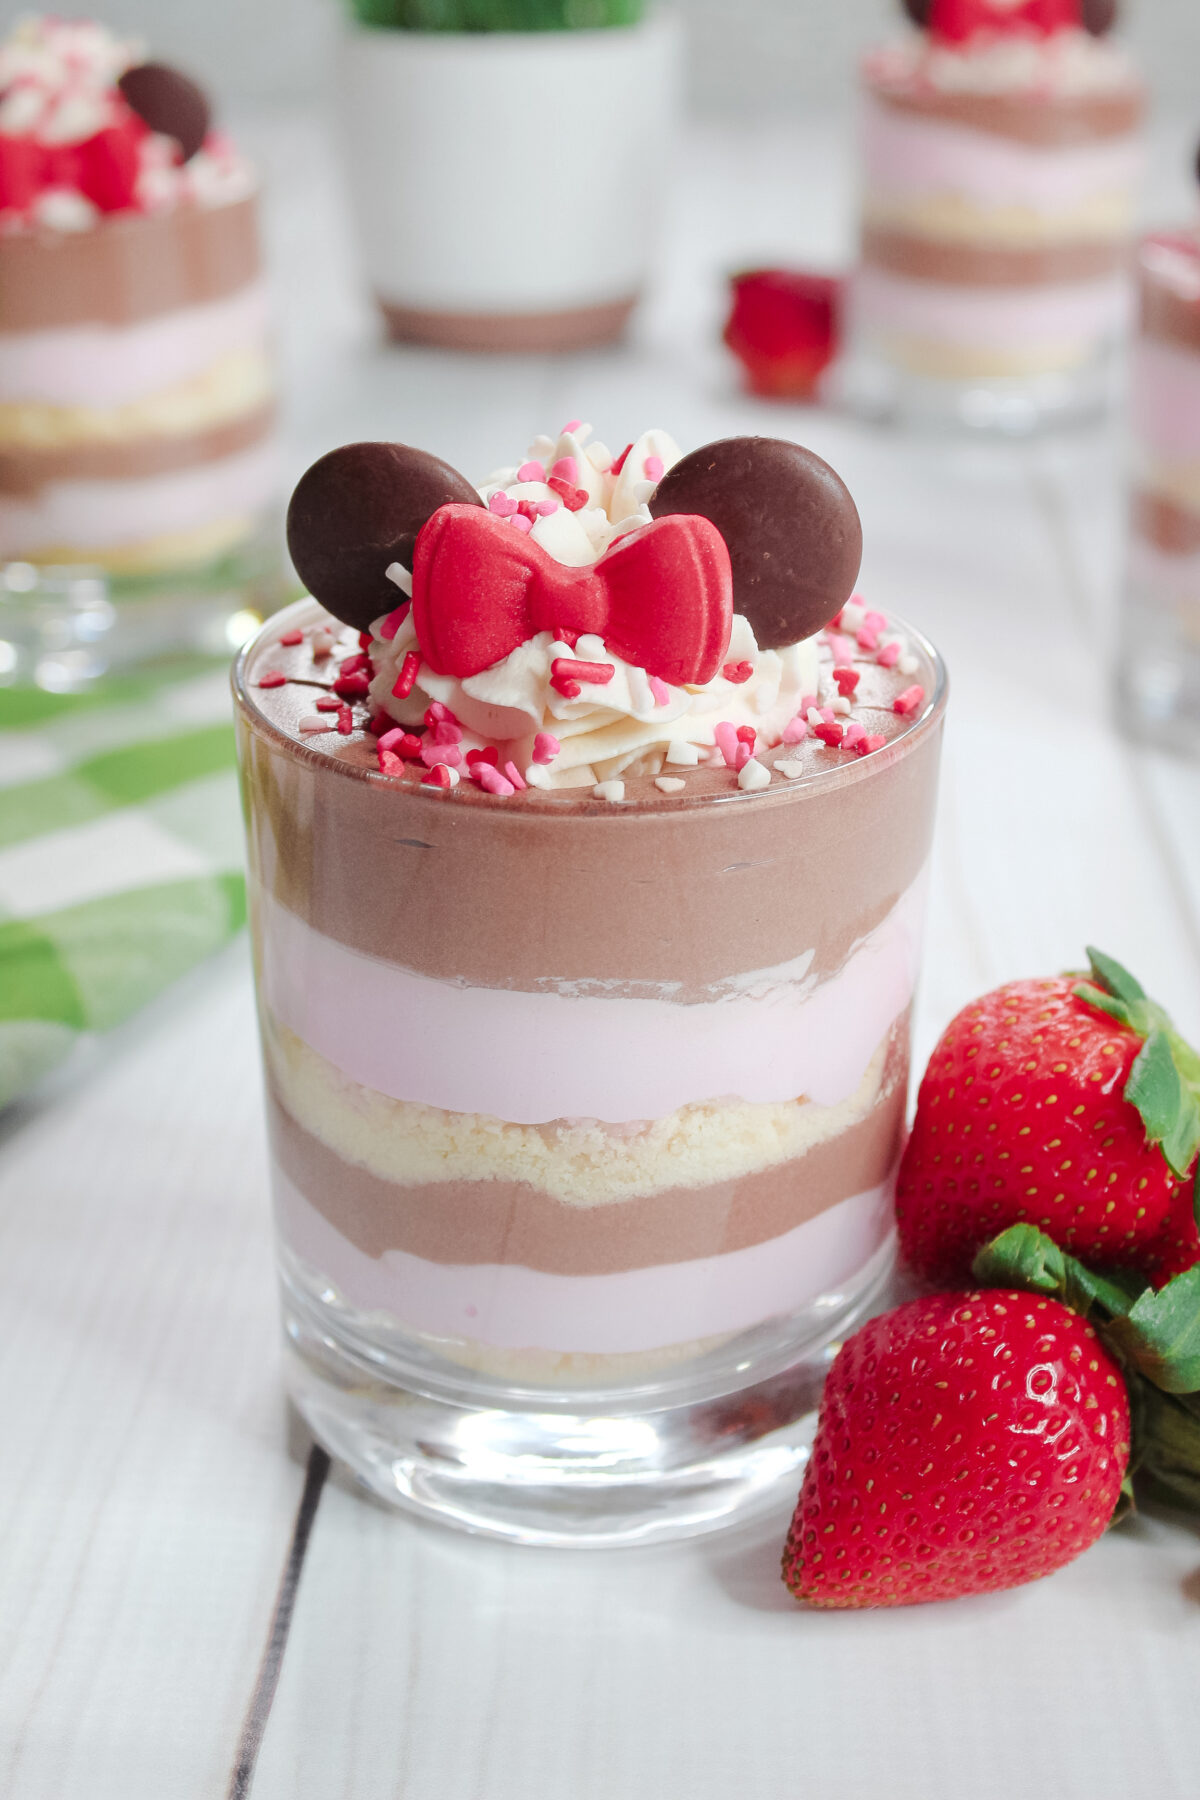 Indulge in whimsical Minnie Mouse Strawberry Parfaits with their layers of creamy strawberry and chocolate this Valentine's Day!